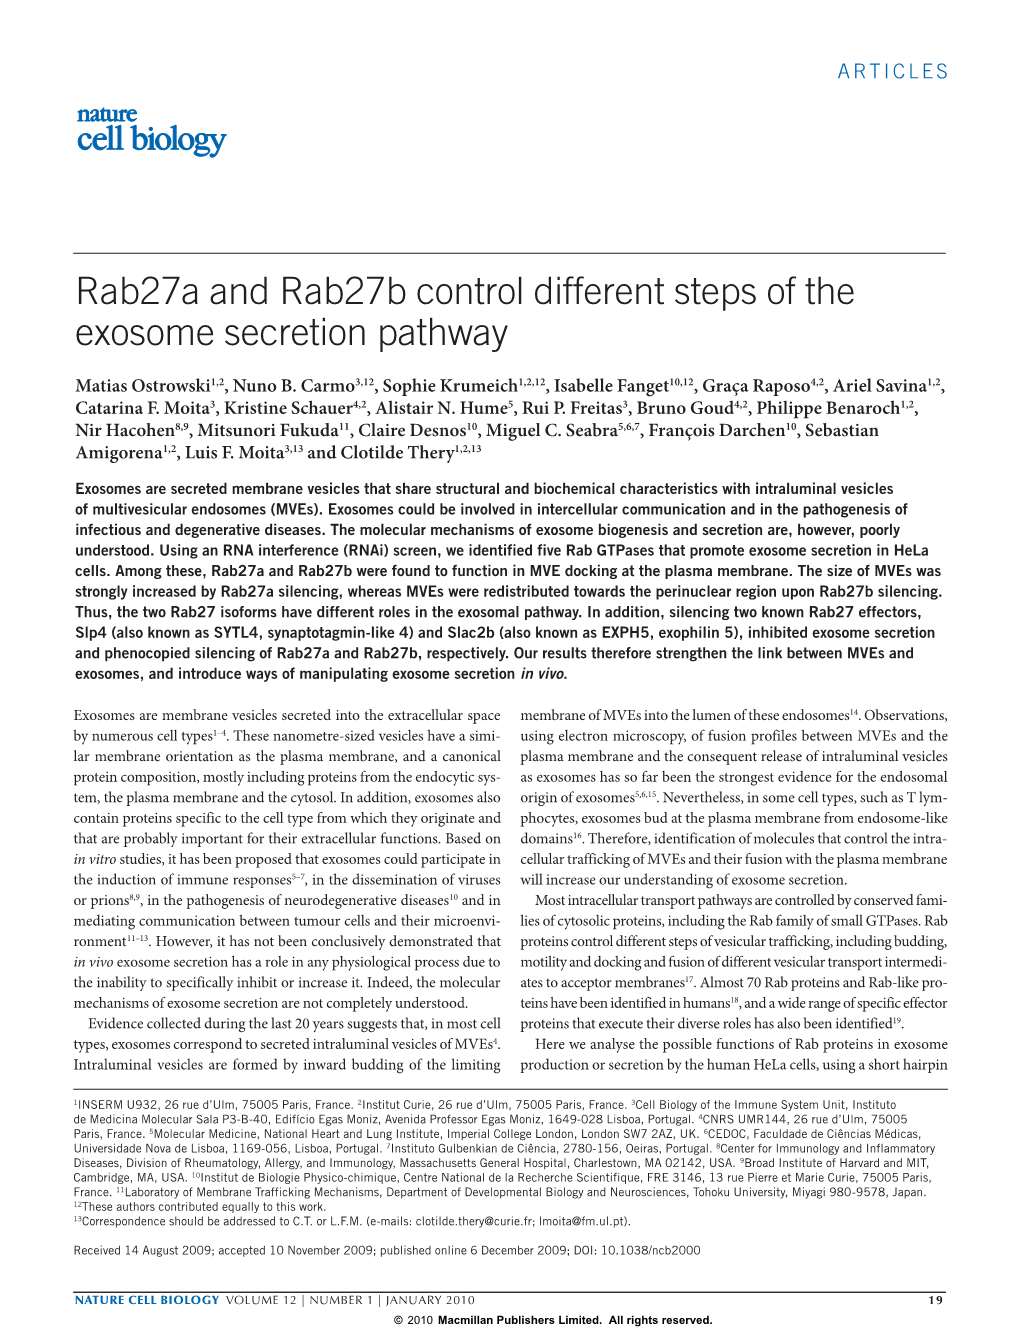 Rab27a and Rab27b Control Different Steps of the Exosome Secretion Pathway